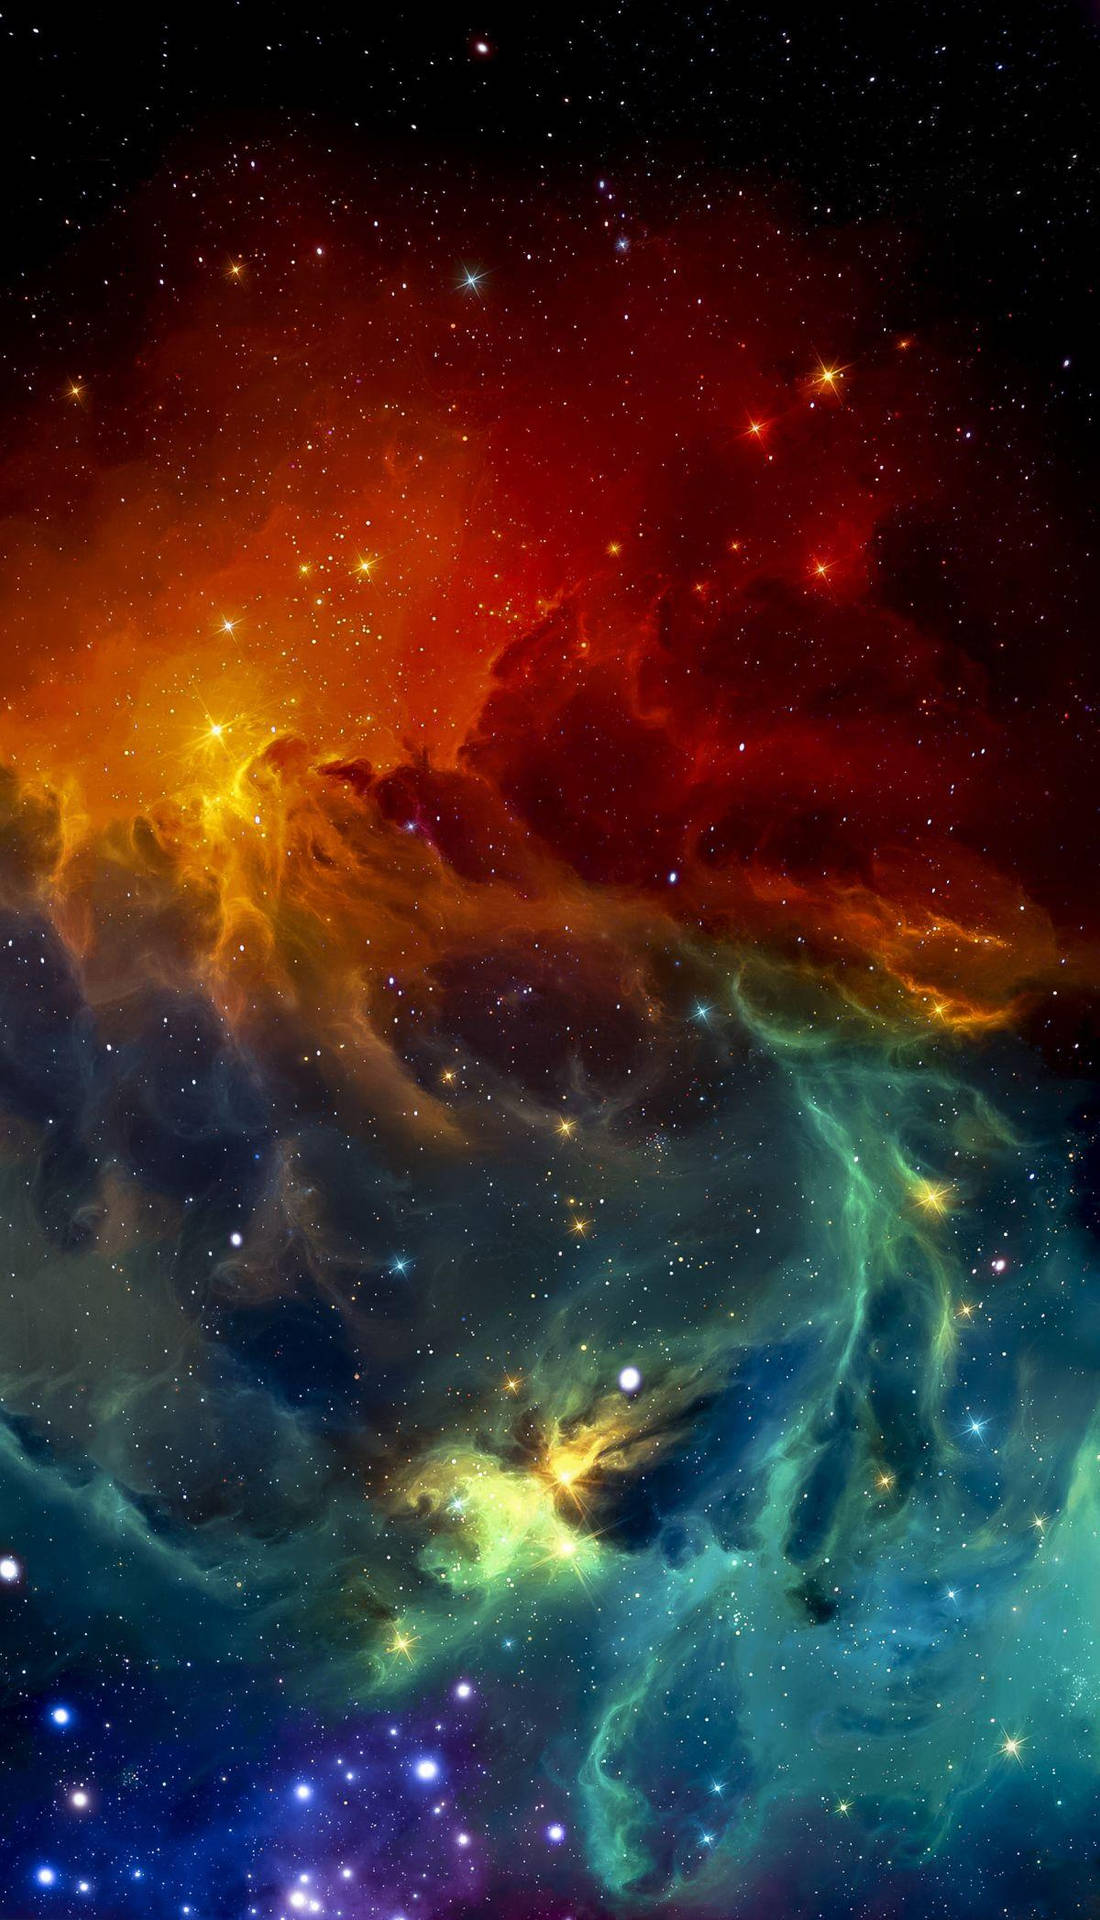 Free Space Iphone Wallpaper Downloads, [100+] Space Iphone Wallpapers for  FREE 